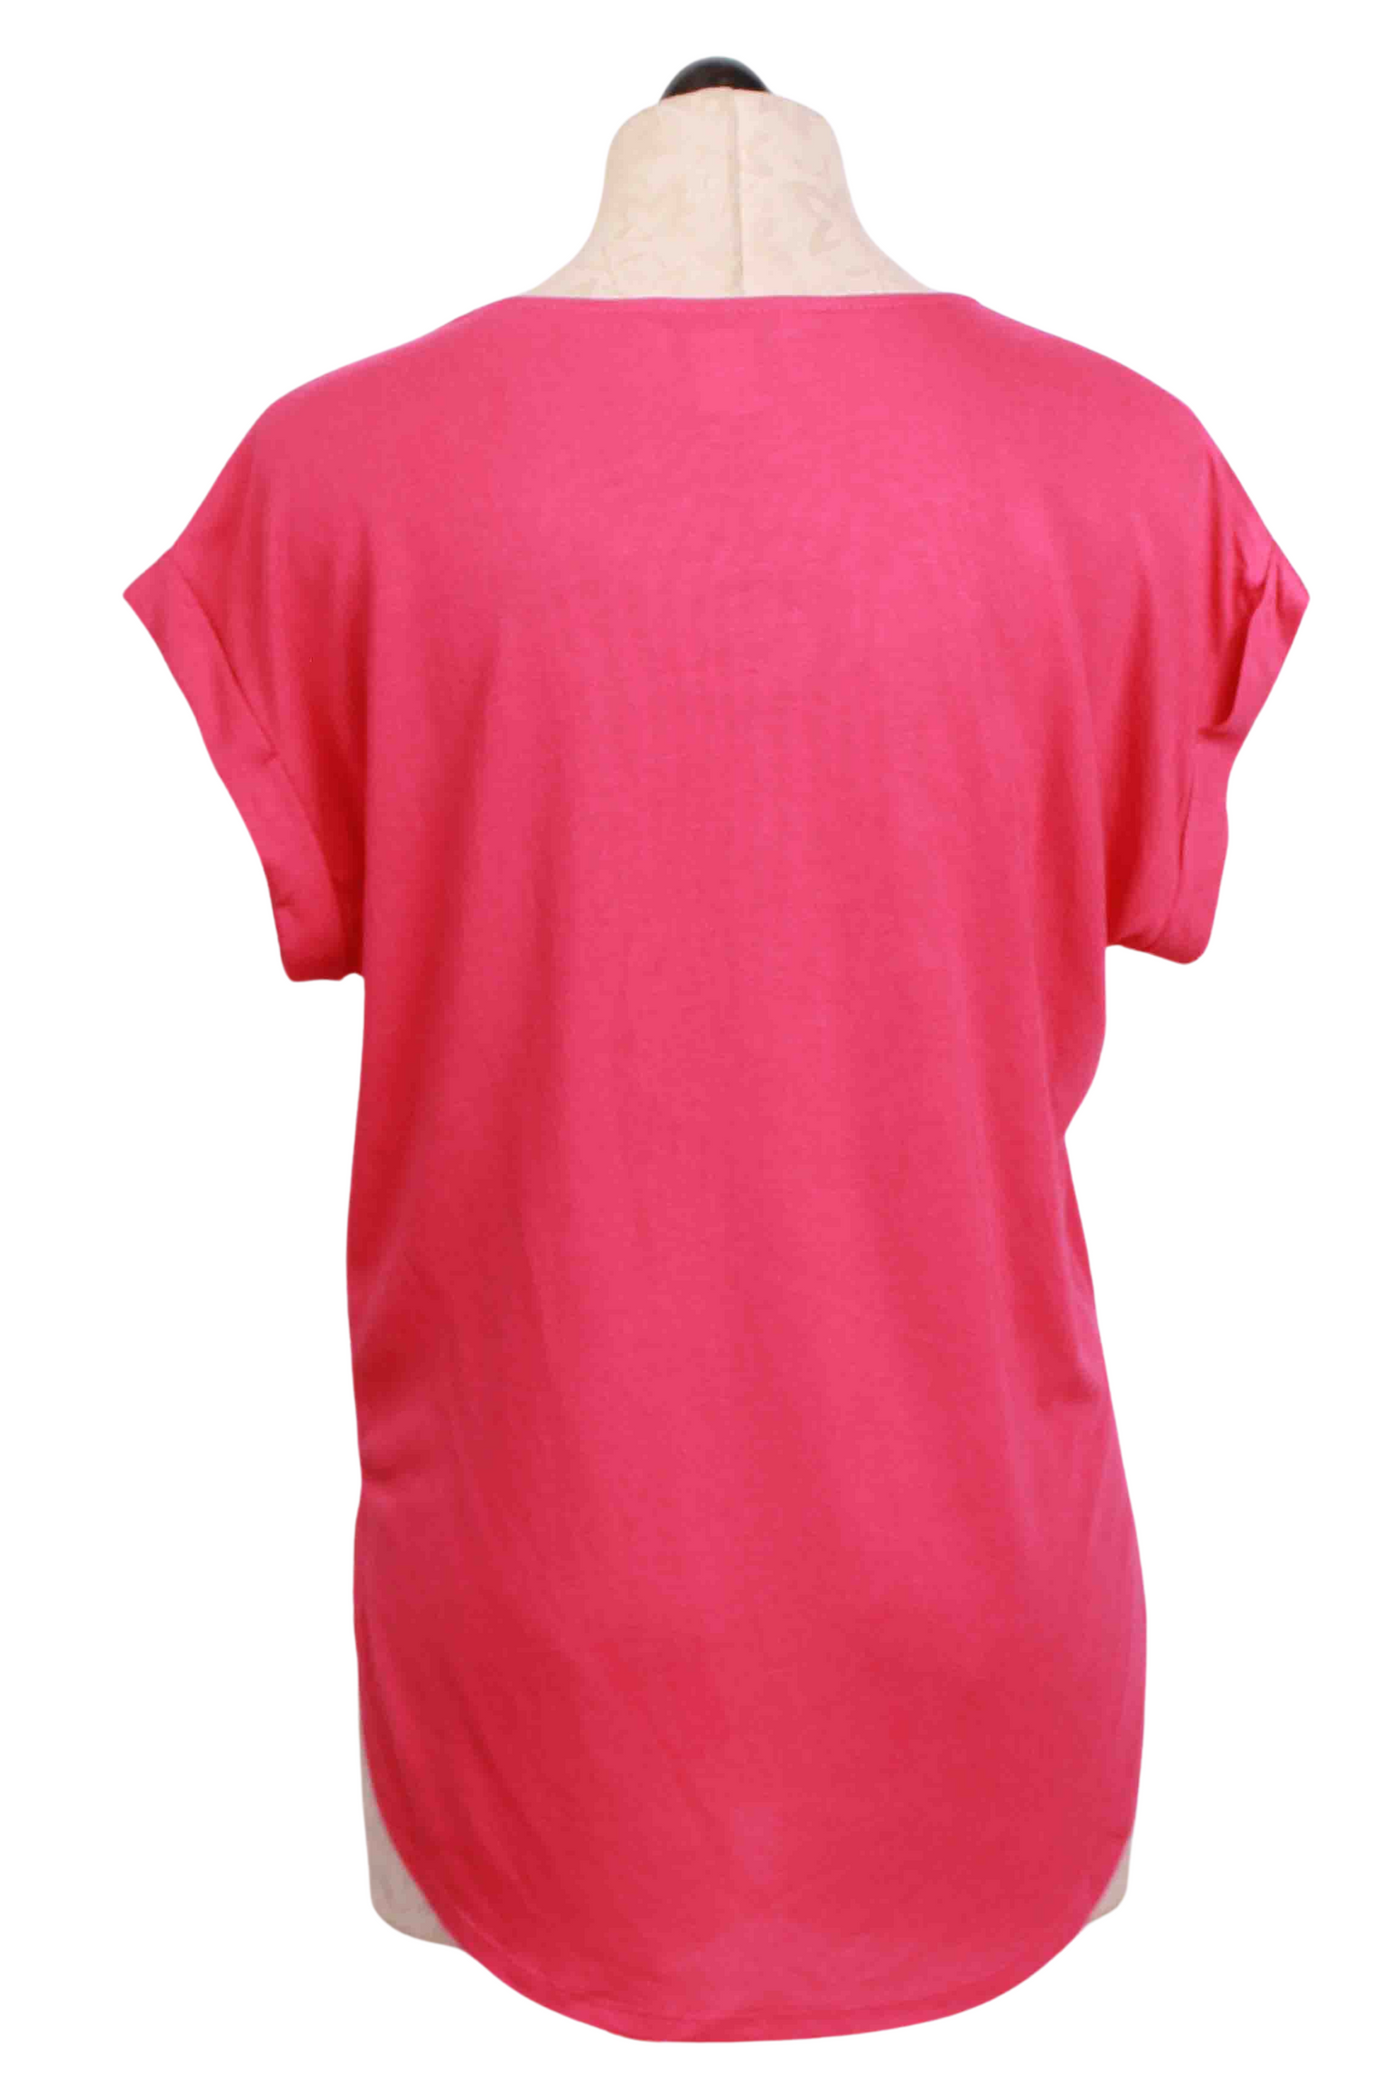 back view of Fuchsia Curved Hem Tee by Apricot 